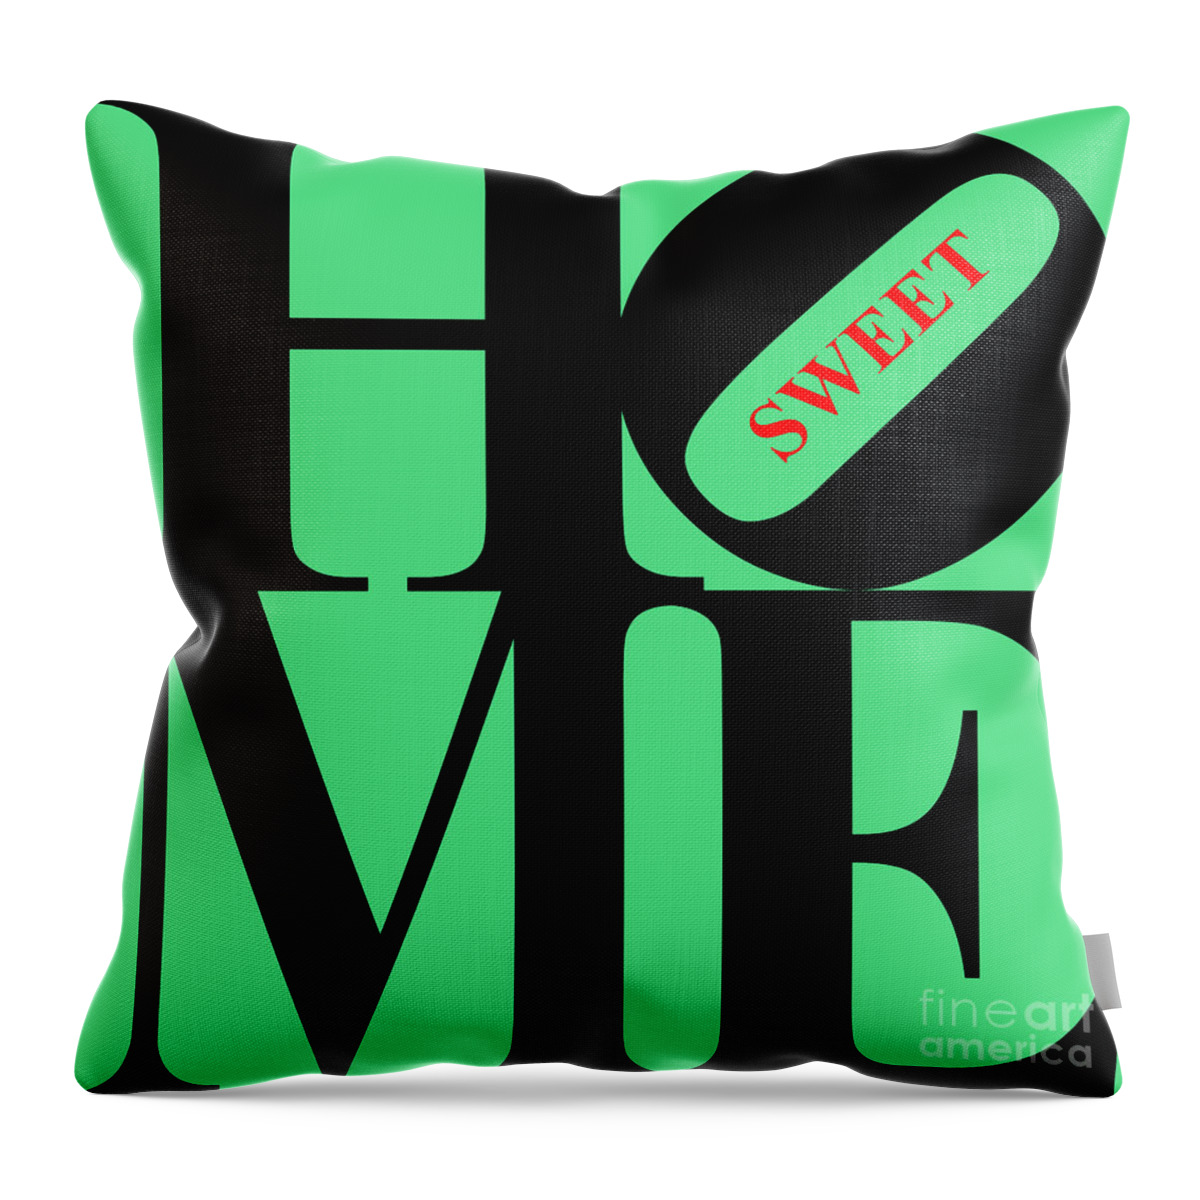 Home Throw Pillow featuring the digital art Home Sweet Home 20130713 Black Green Red by Wingsdomain Art and Photography